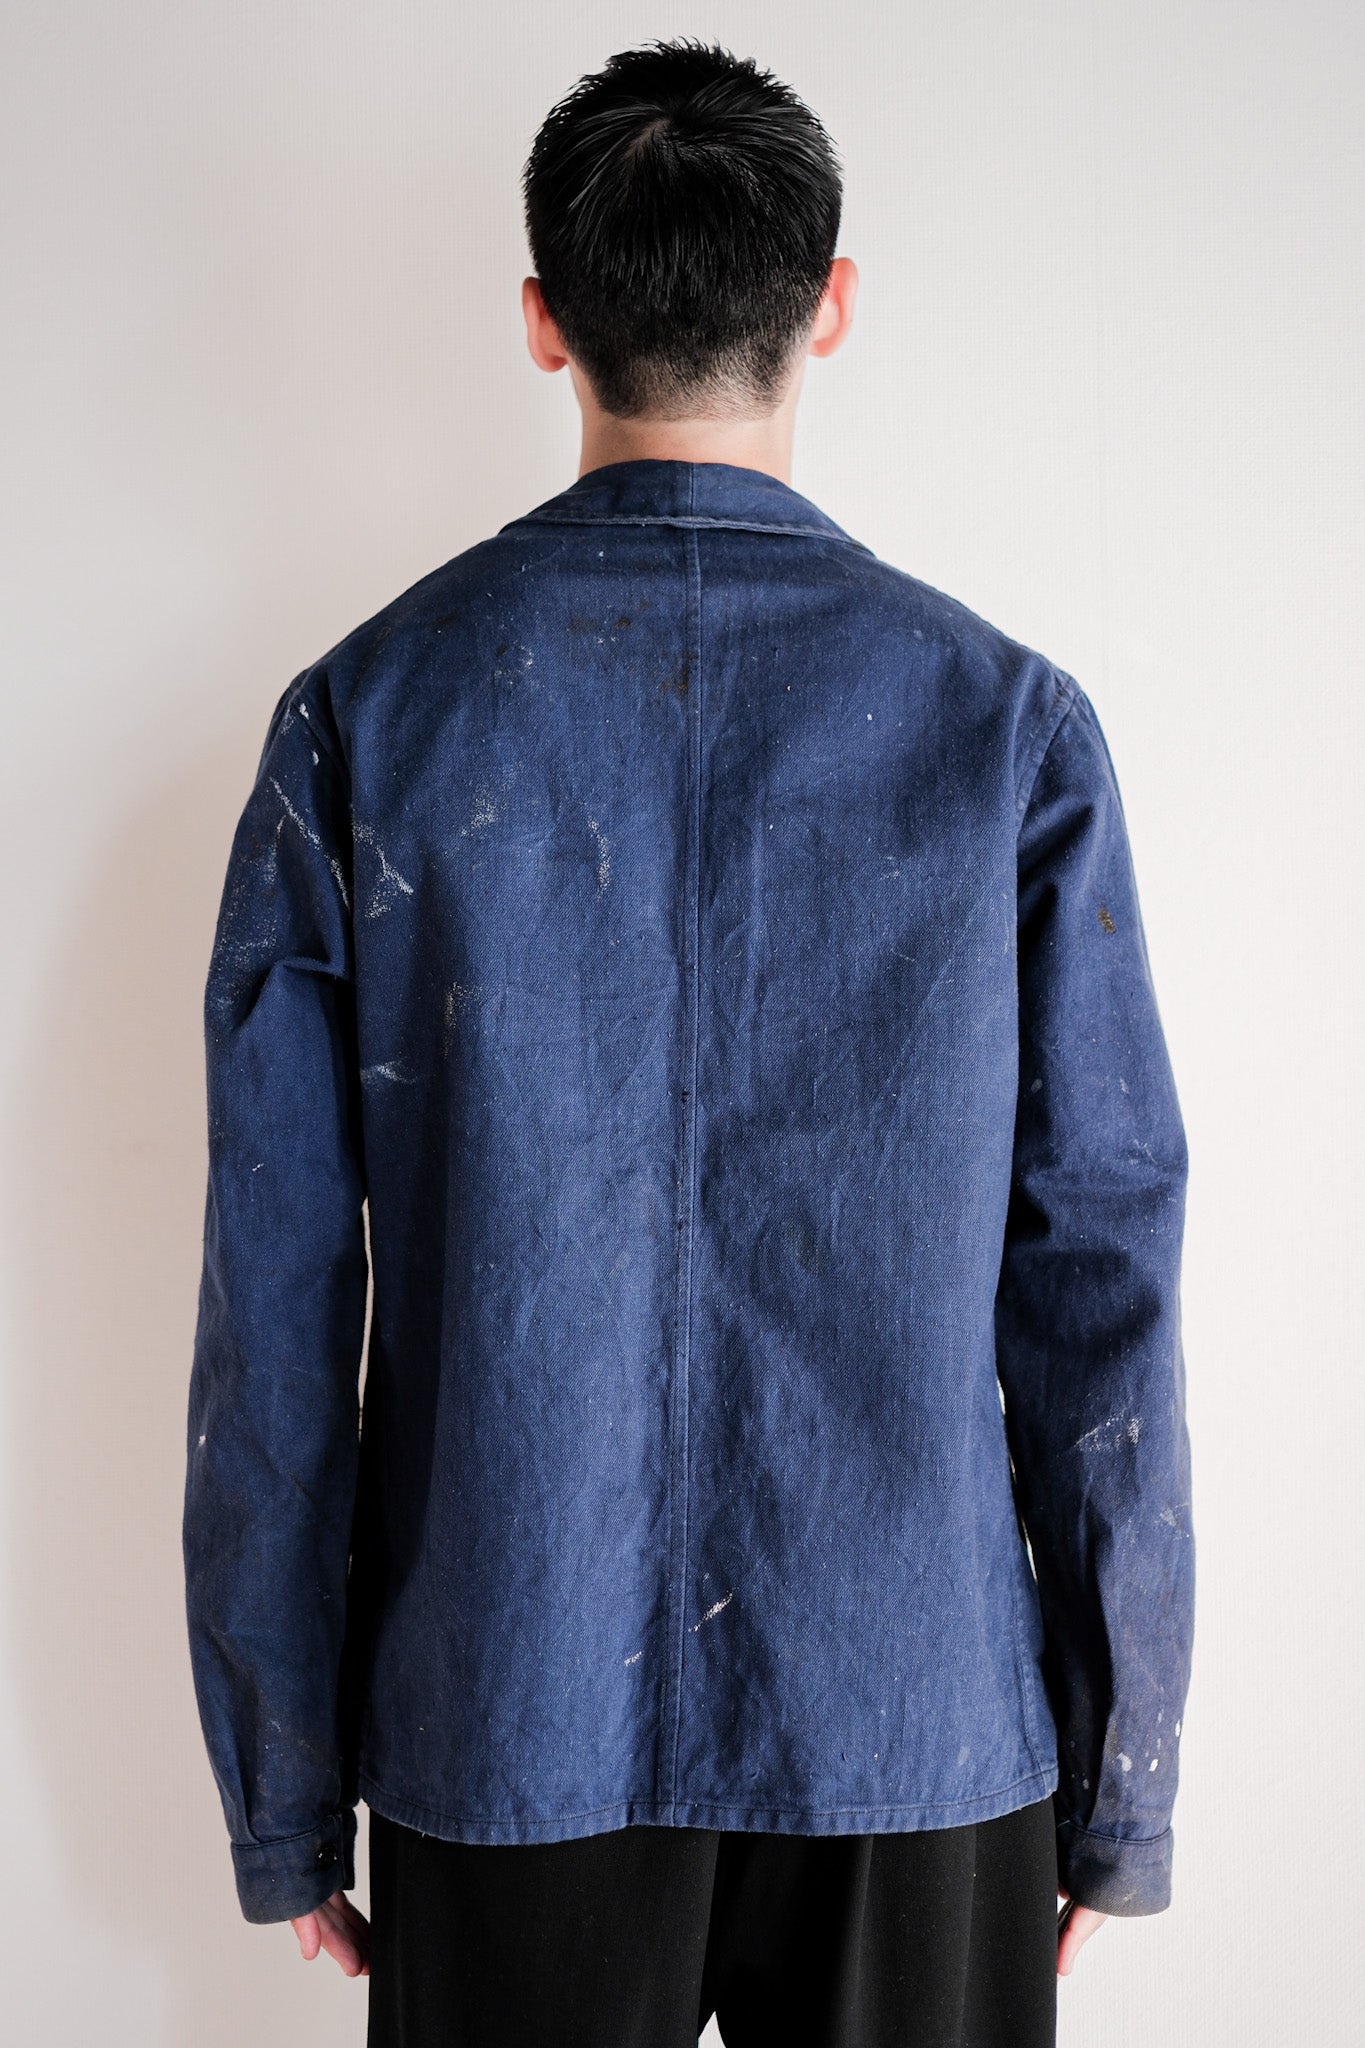 50's】French Vintage Double Breasted Indigo Cotton Twill Work Jacket